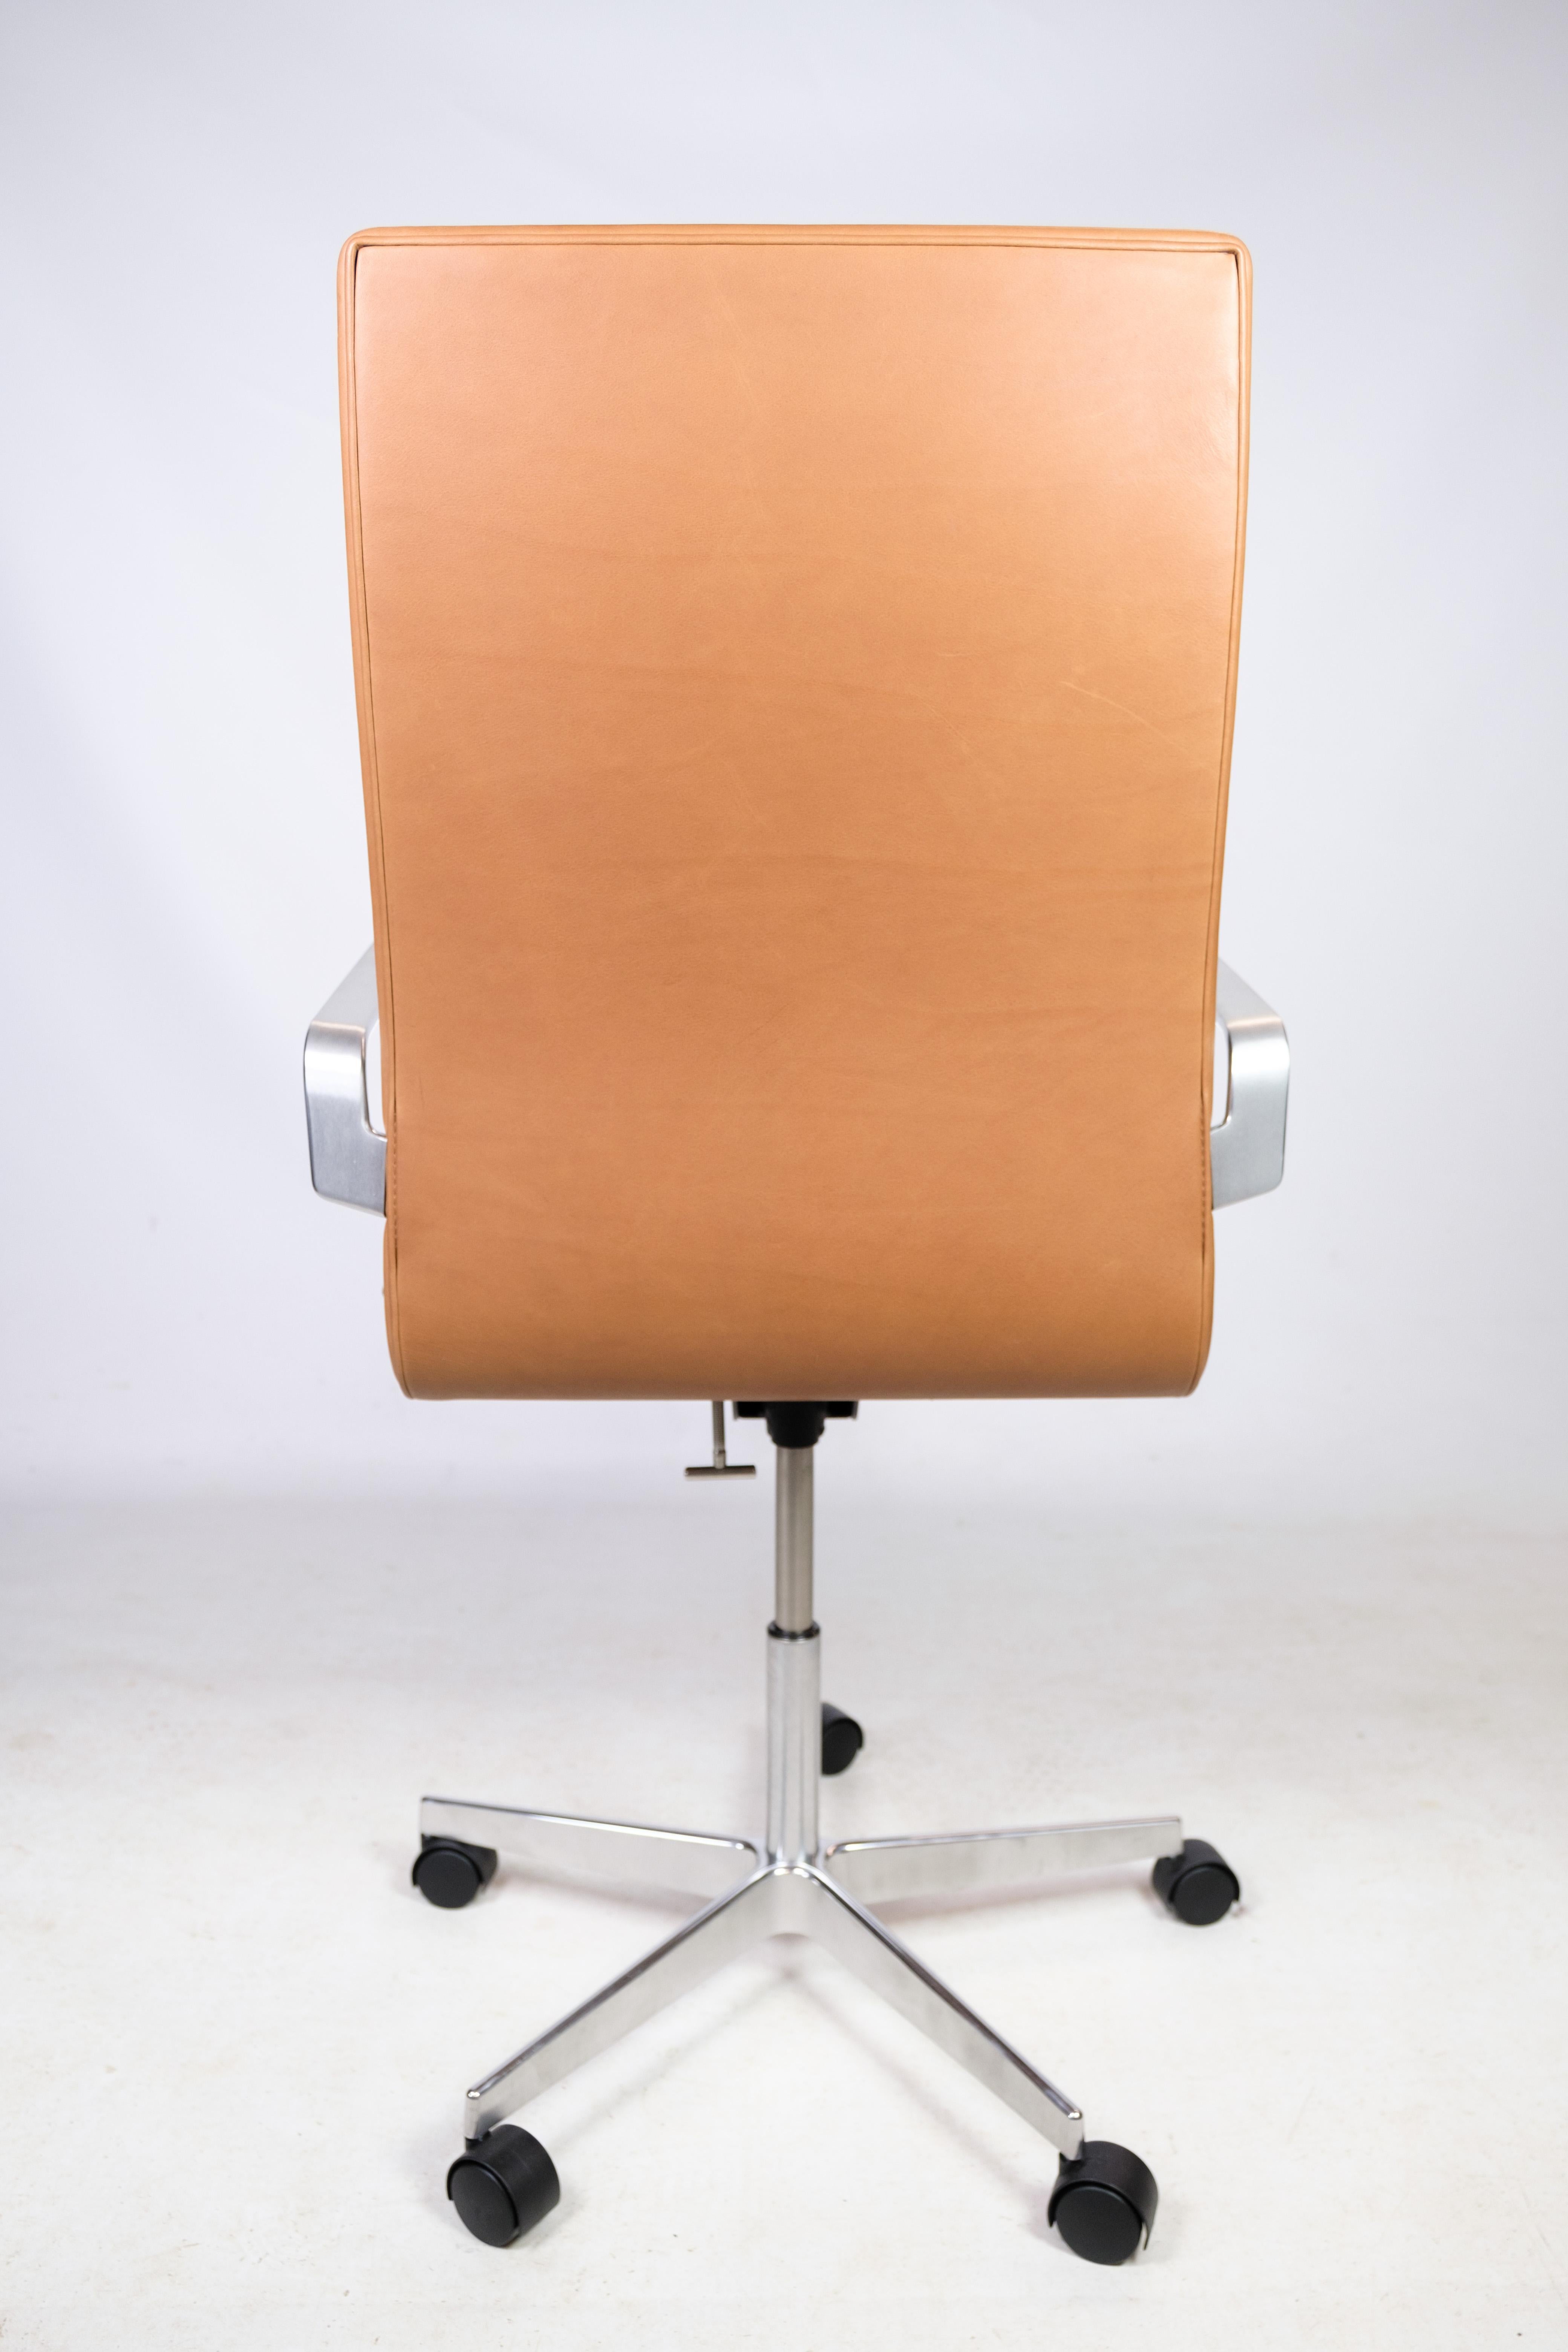 Oxford Classic Office Chair, Model 3293c, Cognac Leather, Arne Jacobsen, 1963 In Excellent Condition For Sale In Lejre, DK